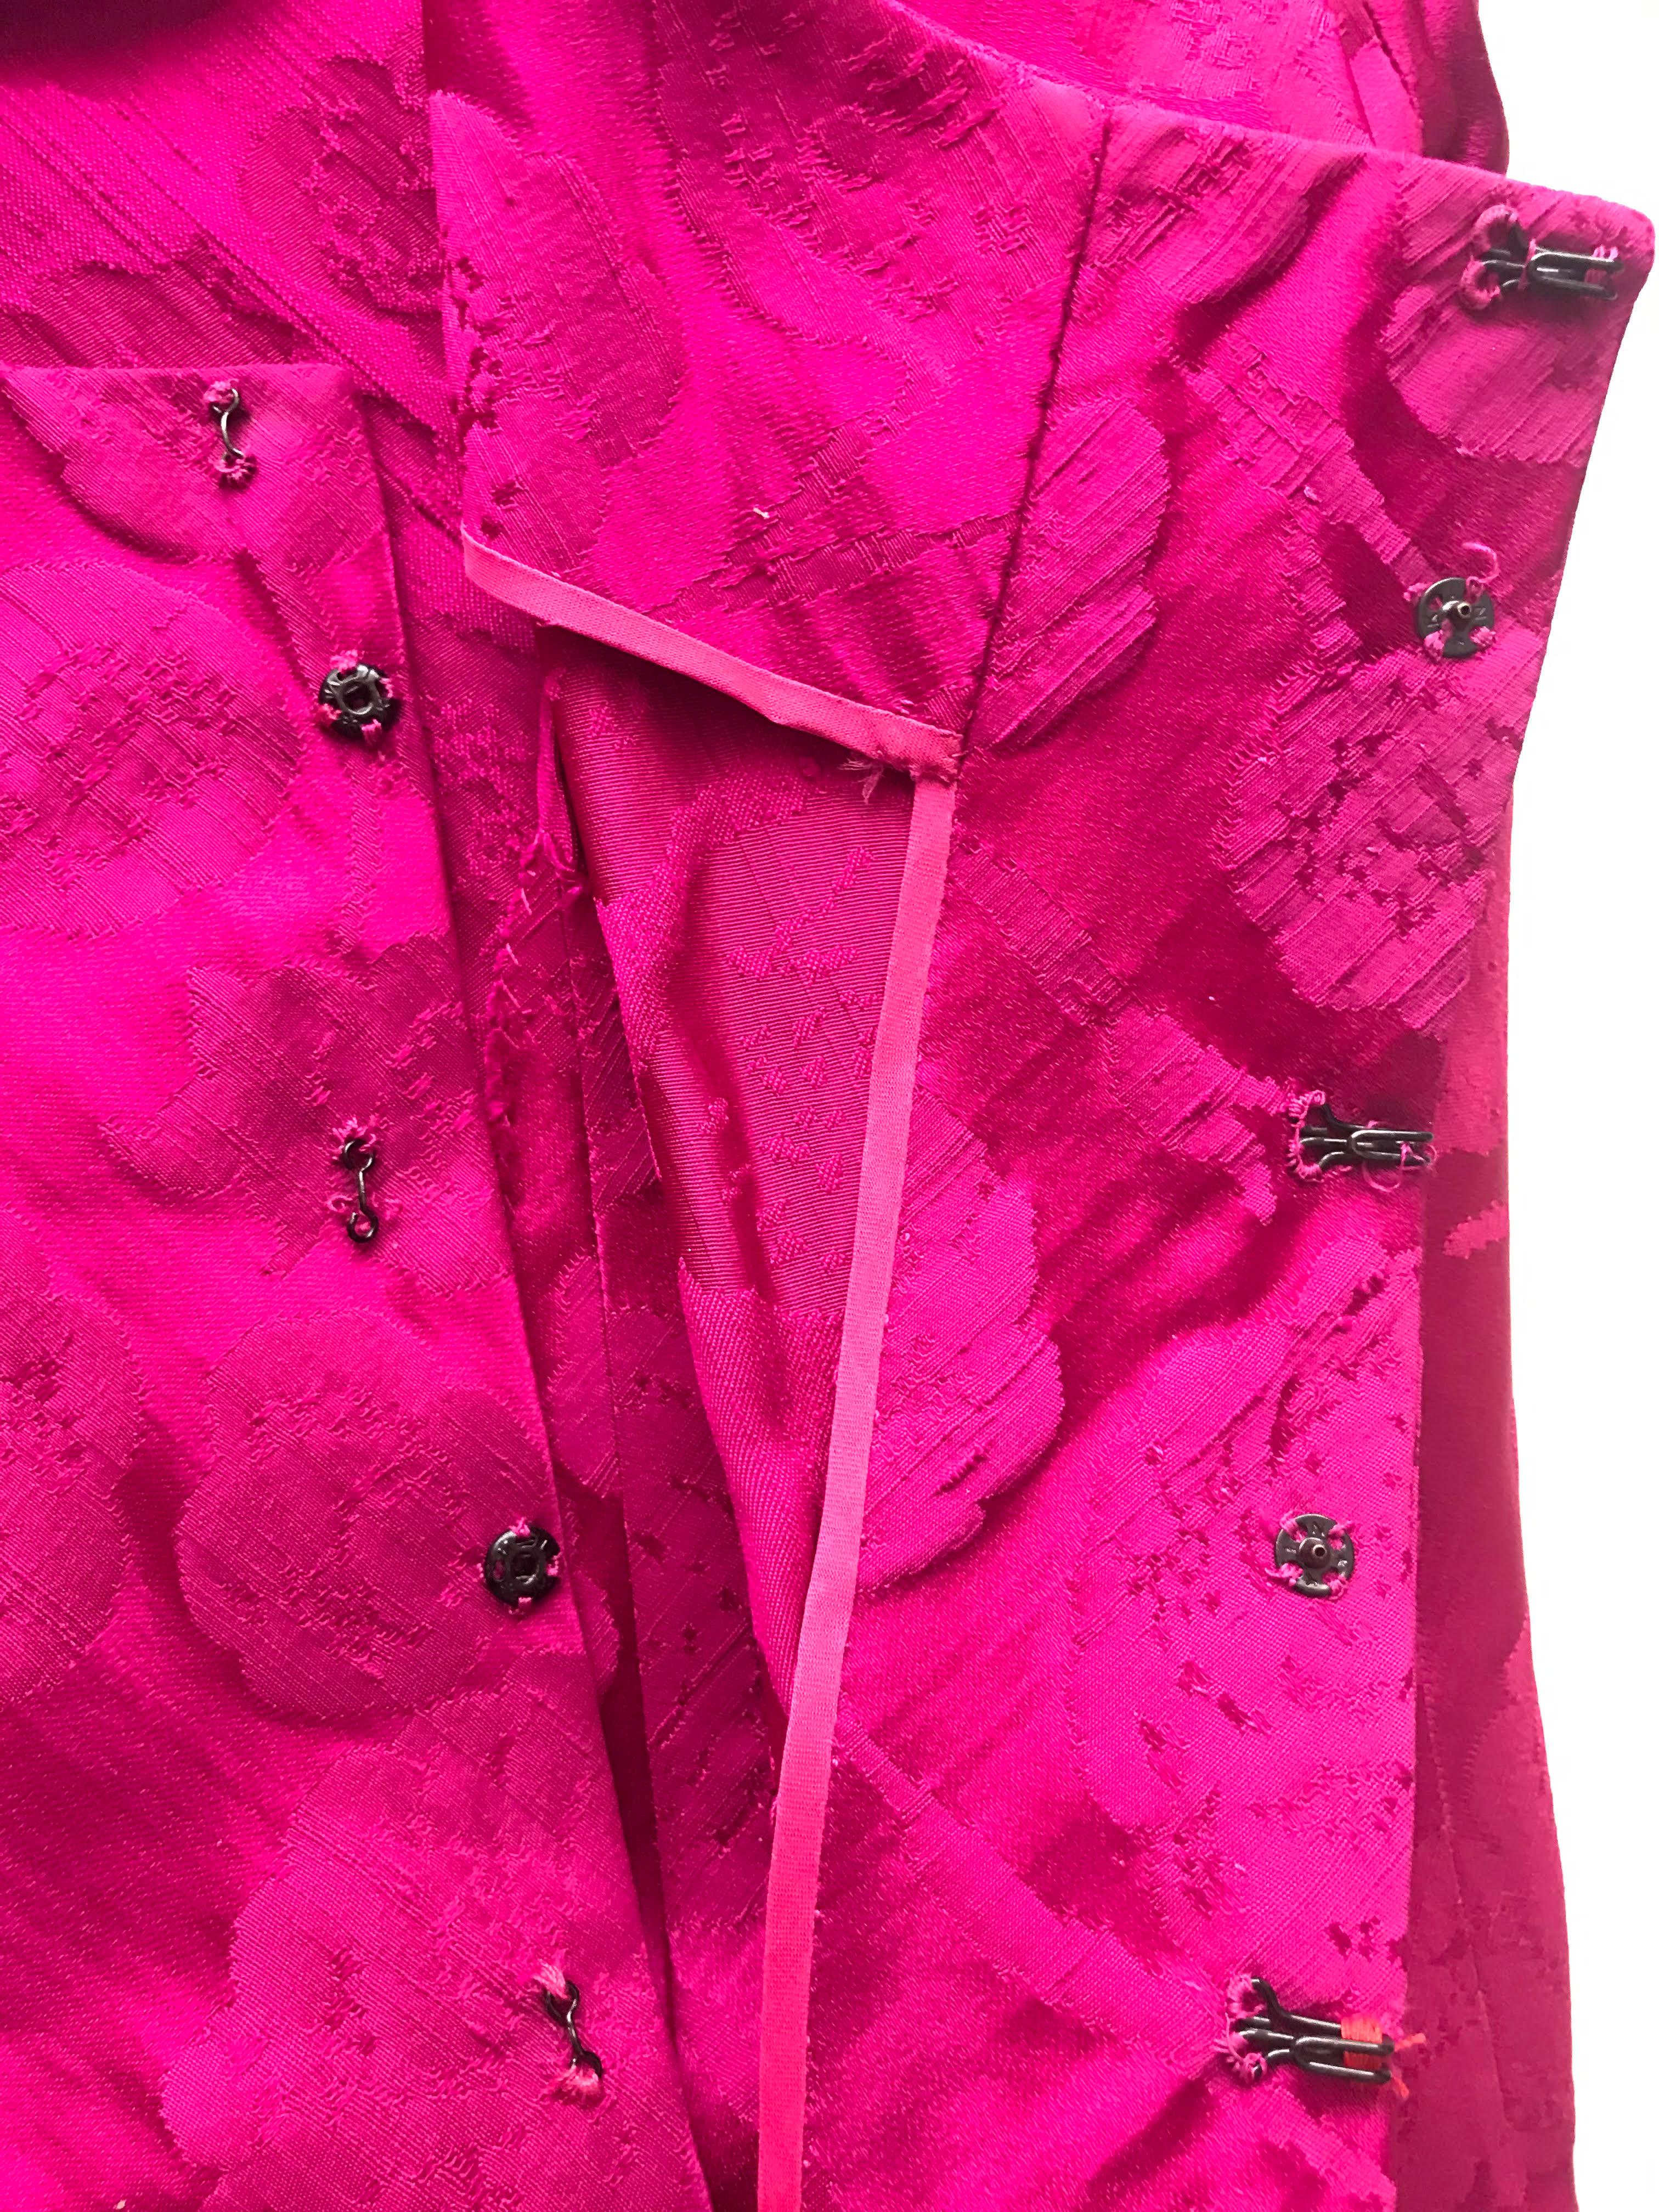 SCHIAPARELLI Attributed Pink Silk Damask Couture Cocktail Dress Size 4  For Sale 4